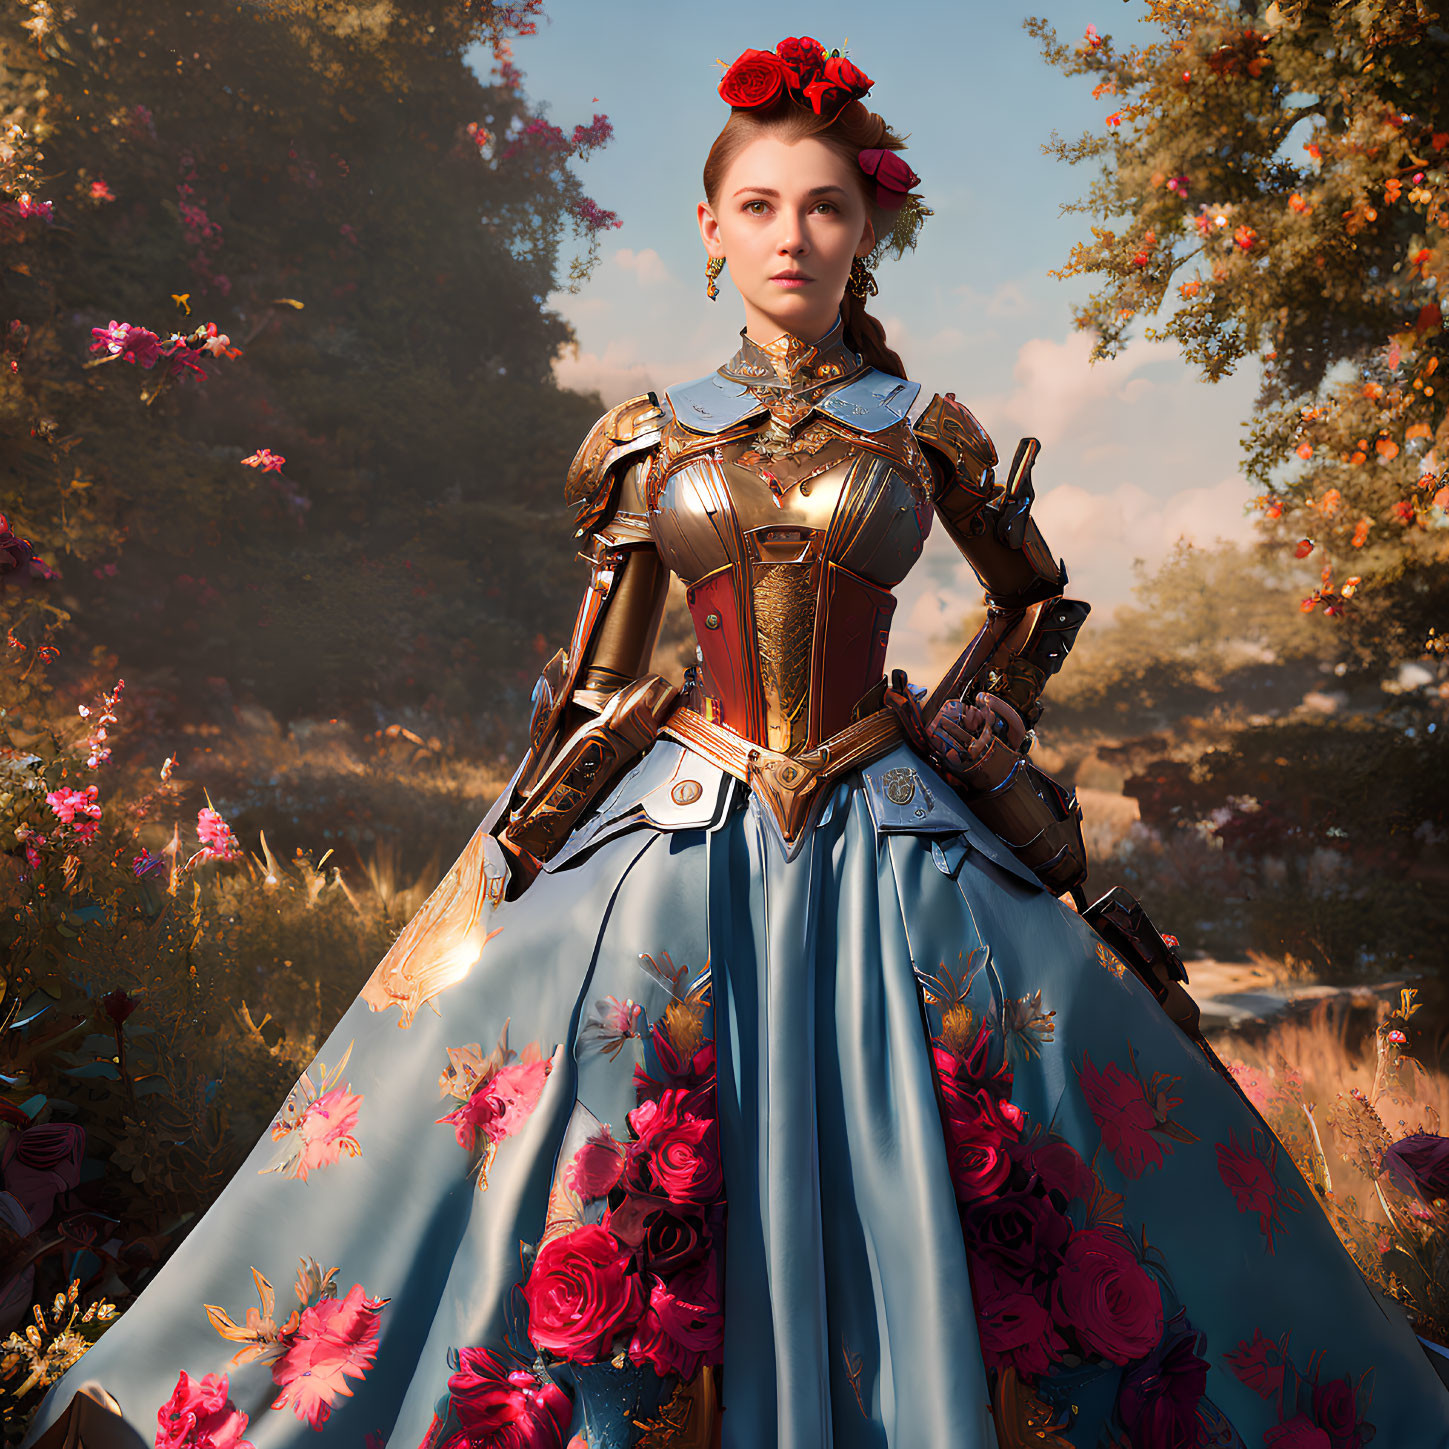 Woman in Blue and Gold Renaissance Dress with Armor in Sunlit Garden